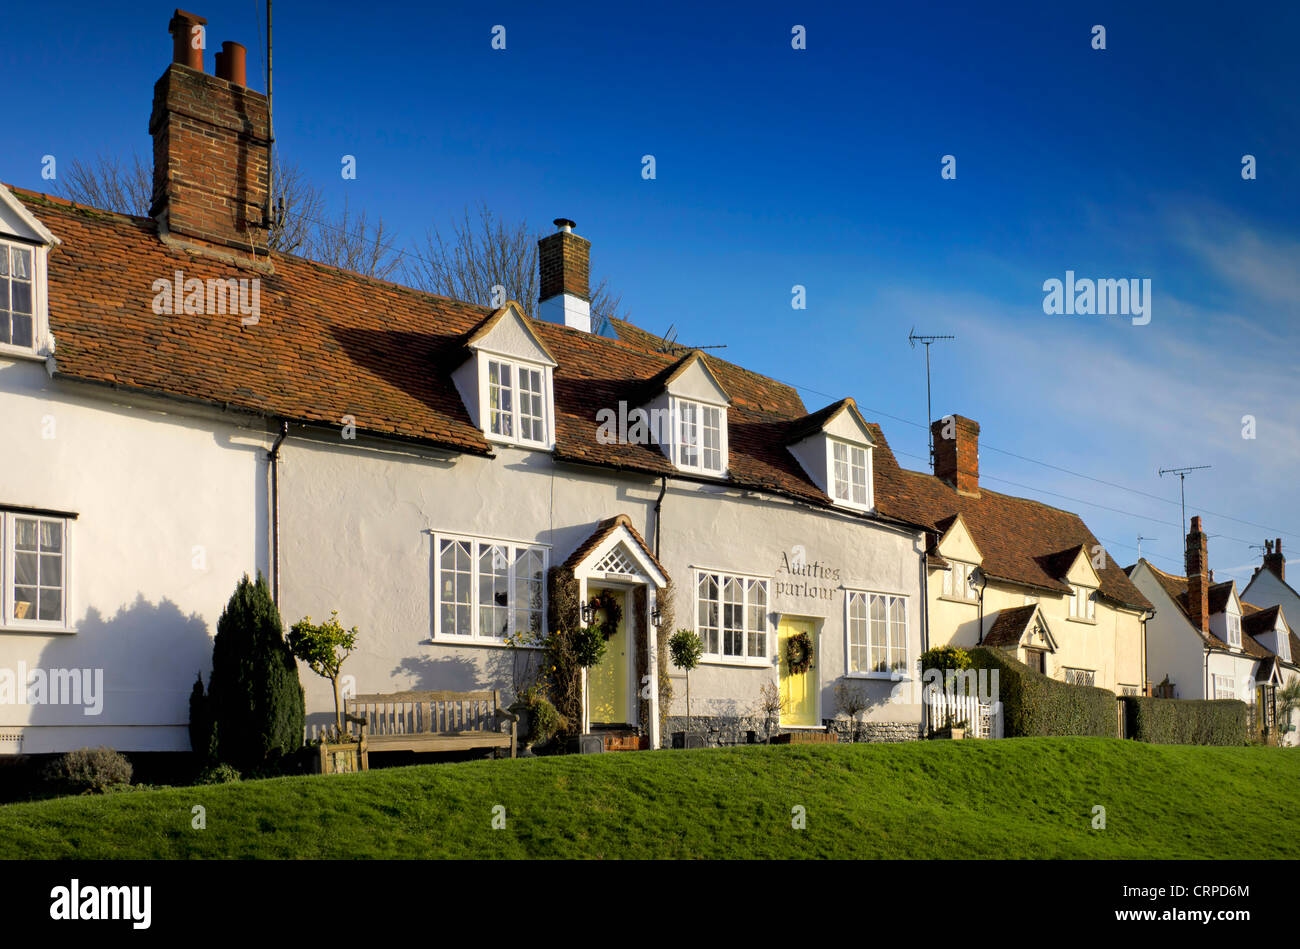 A row of cottages in the pretty village of Finchingfield described as 'the most photographed village in England'. Stock Photo